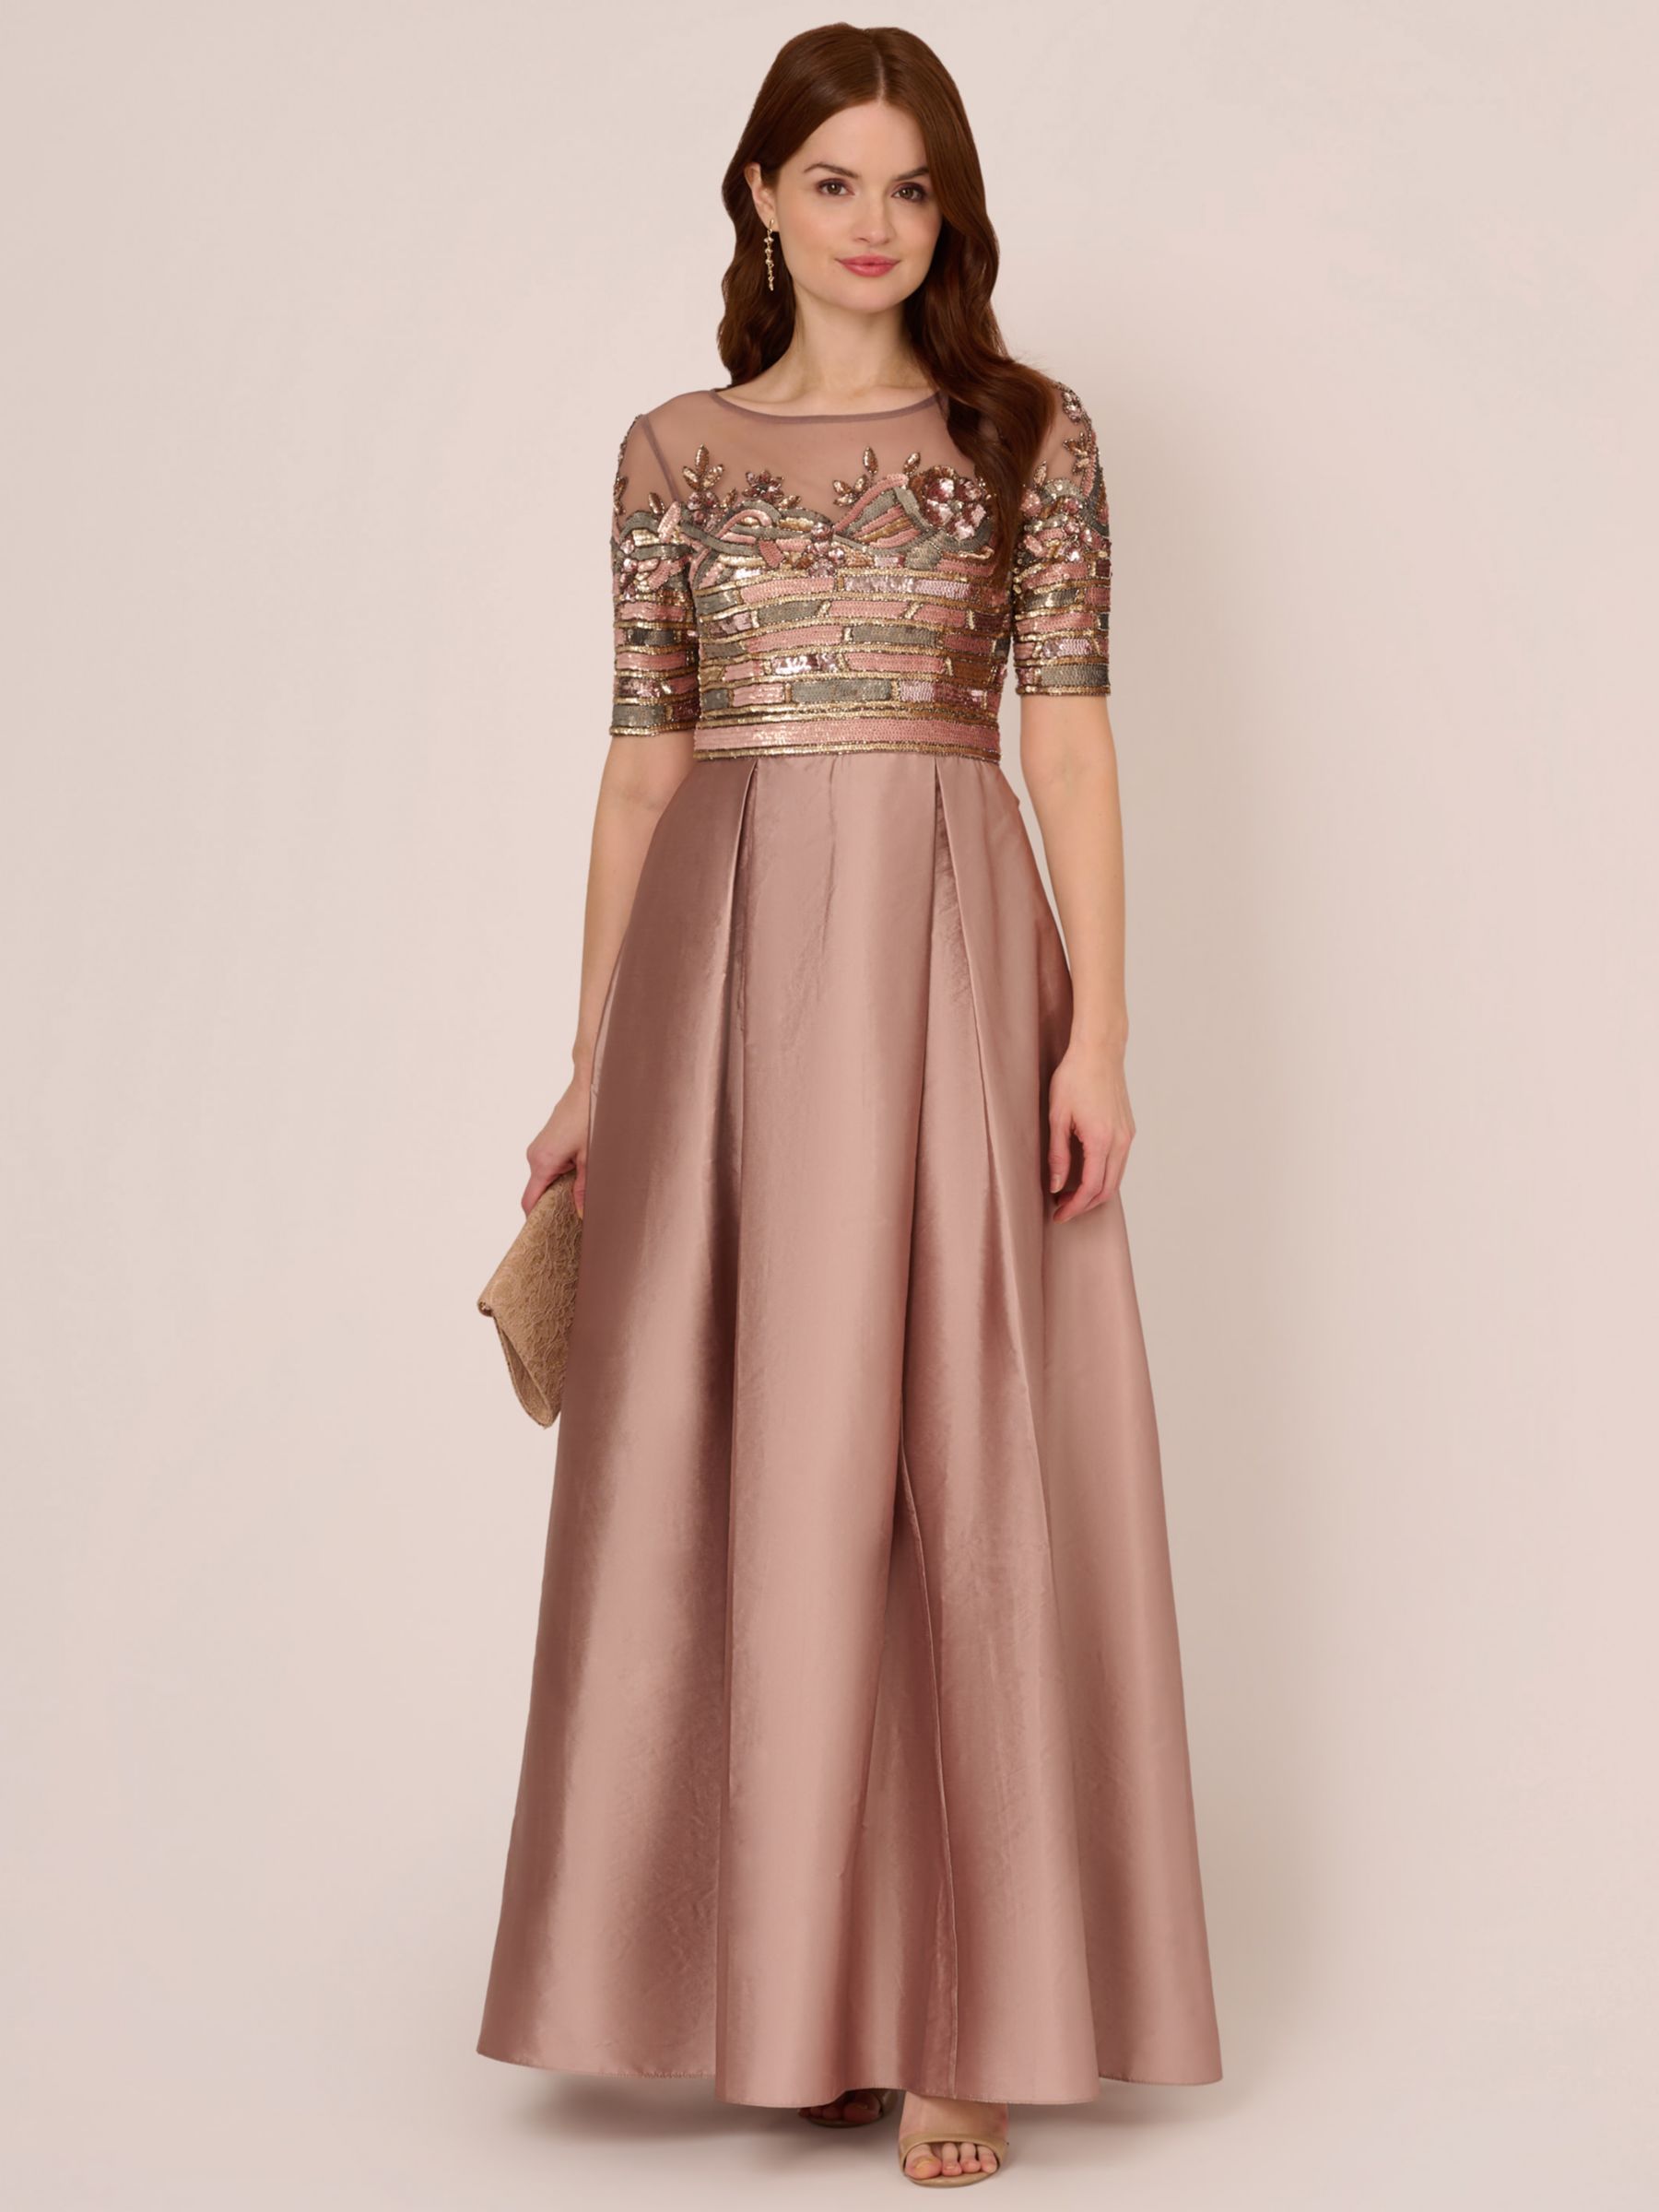 Buy Adrianna Papell Embellished Tafetta Dress Maxi Dress, Stone Online at johnlewis.com